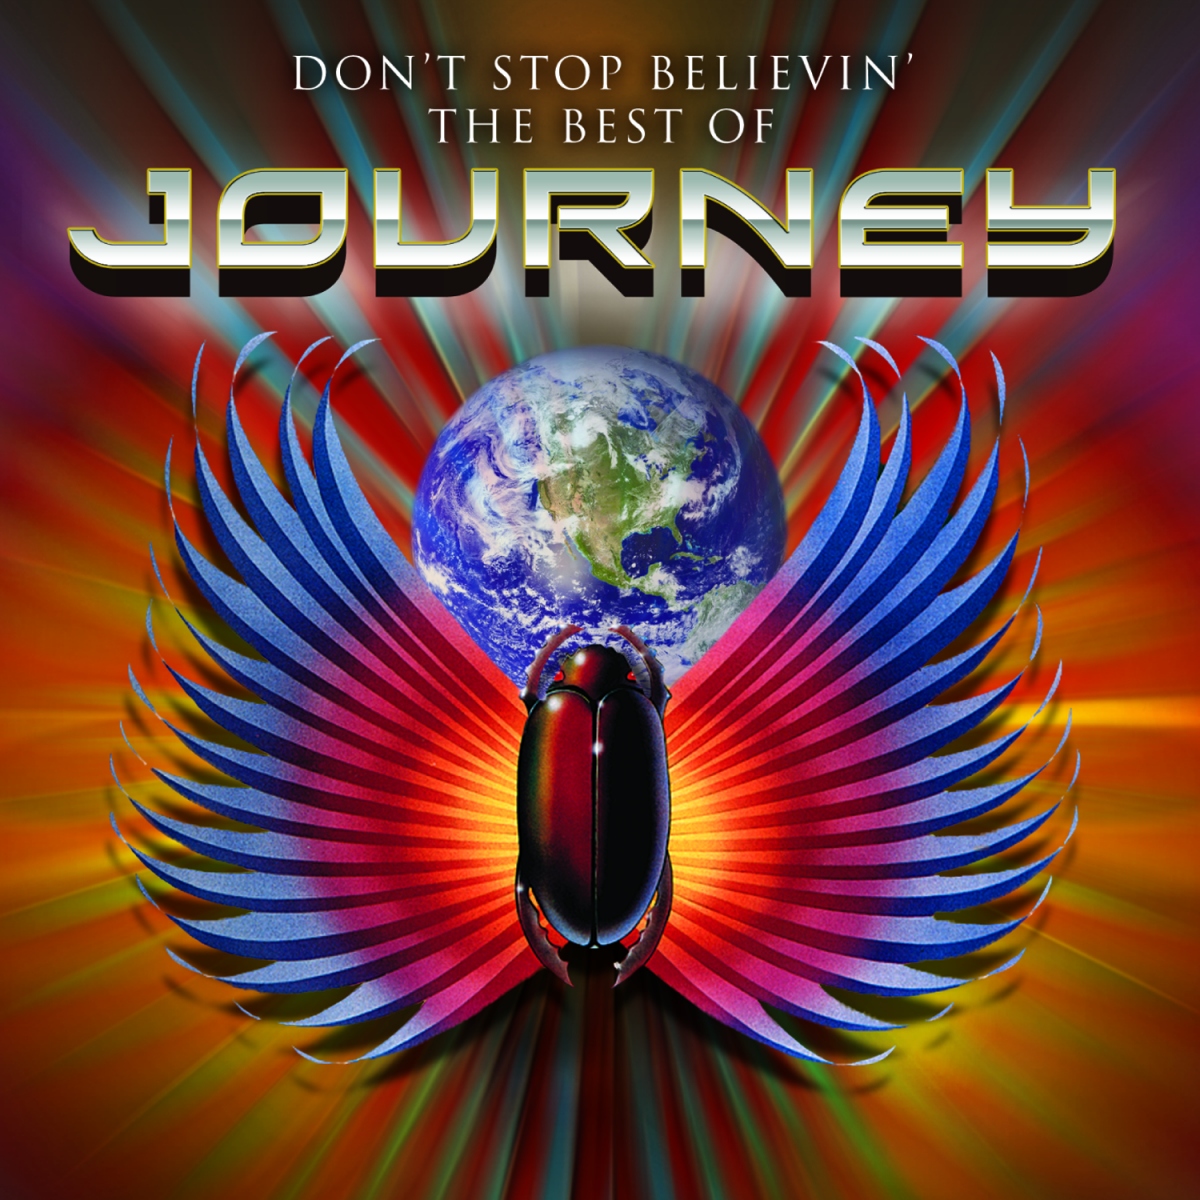 journey remake songs